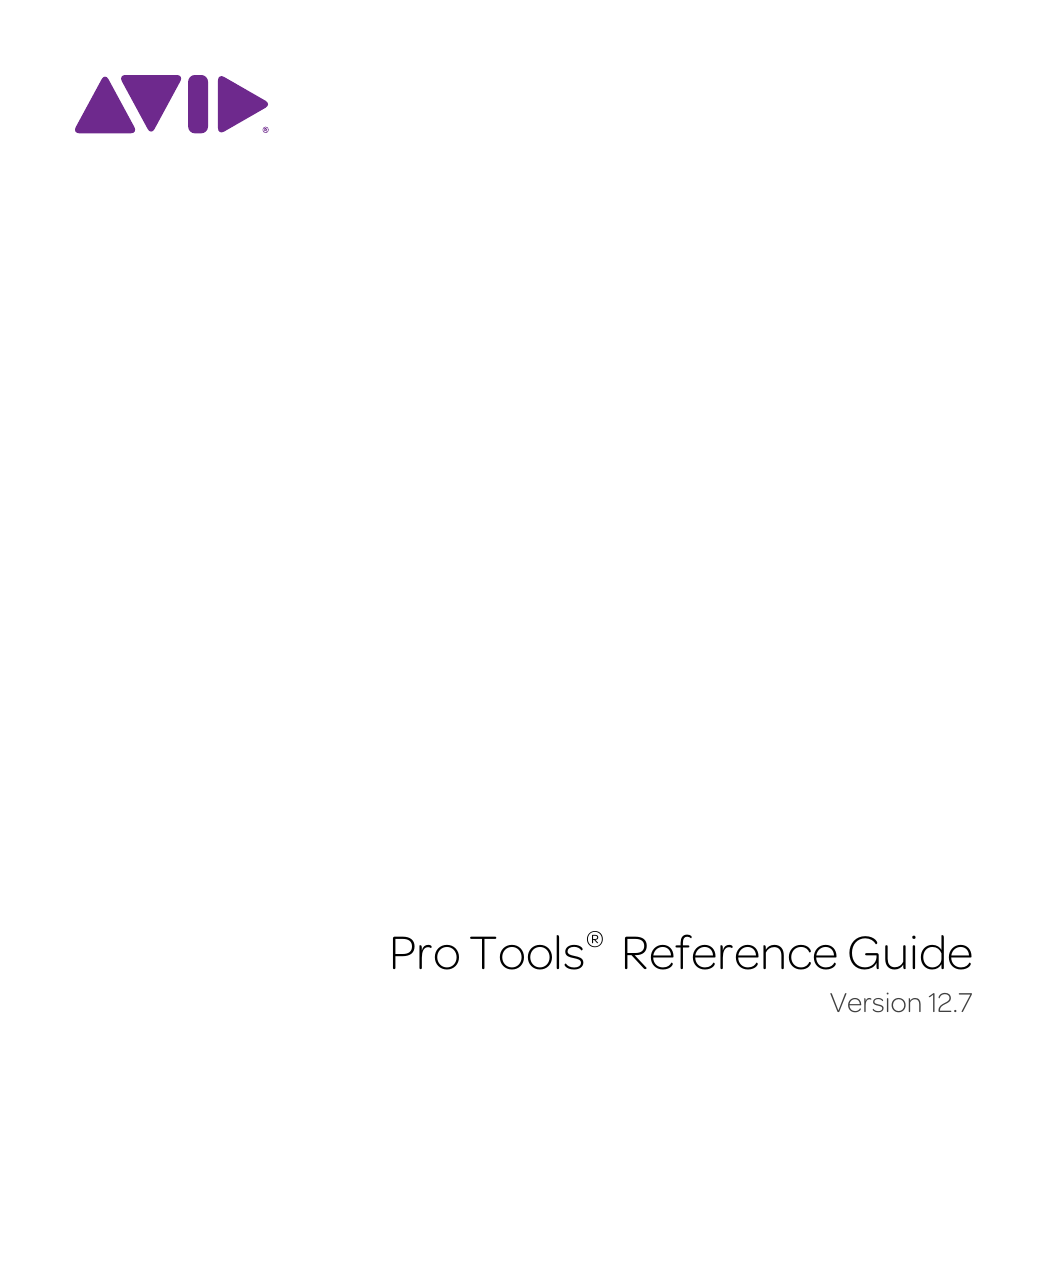 wha os does pro tools 12.7 work with